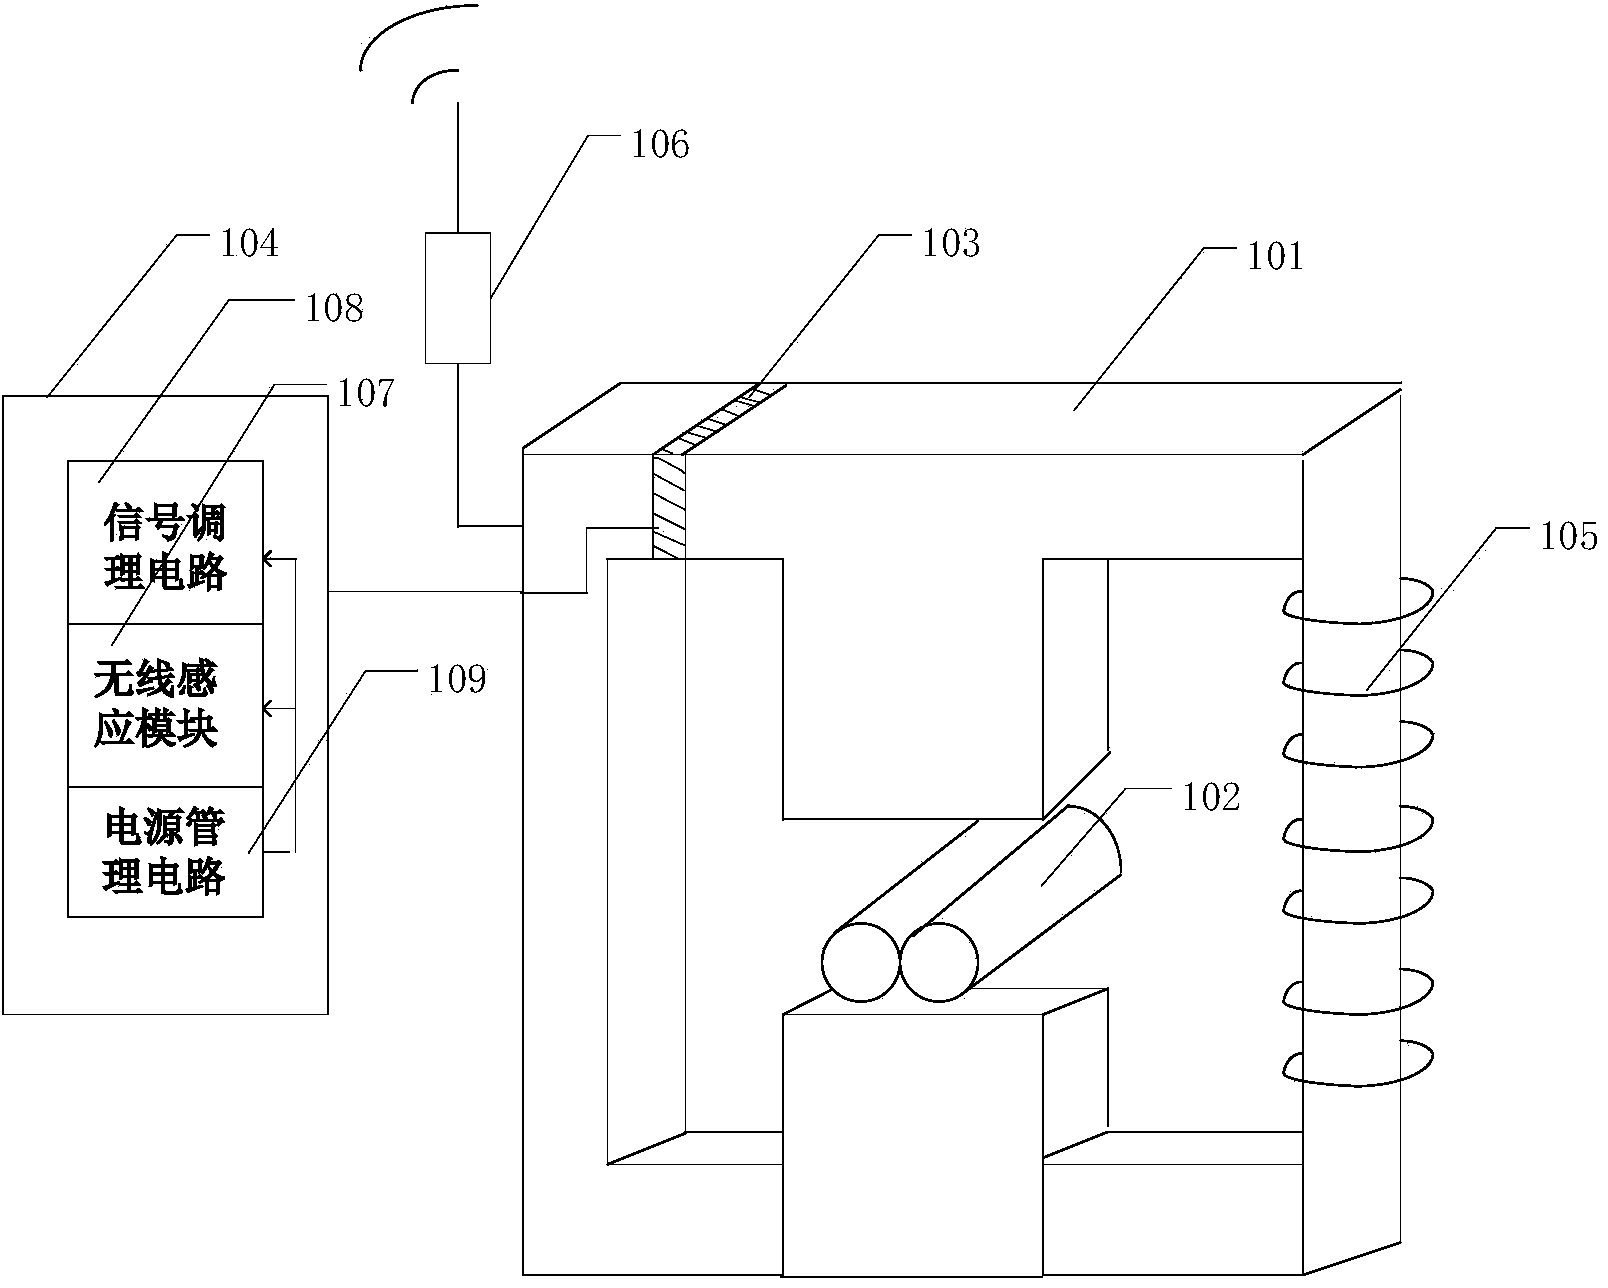 Double-wire Hall current sensor